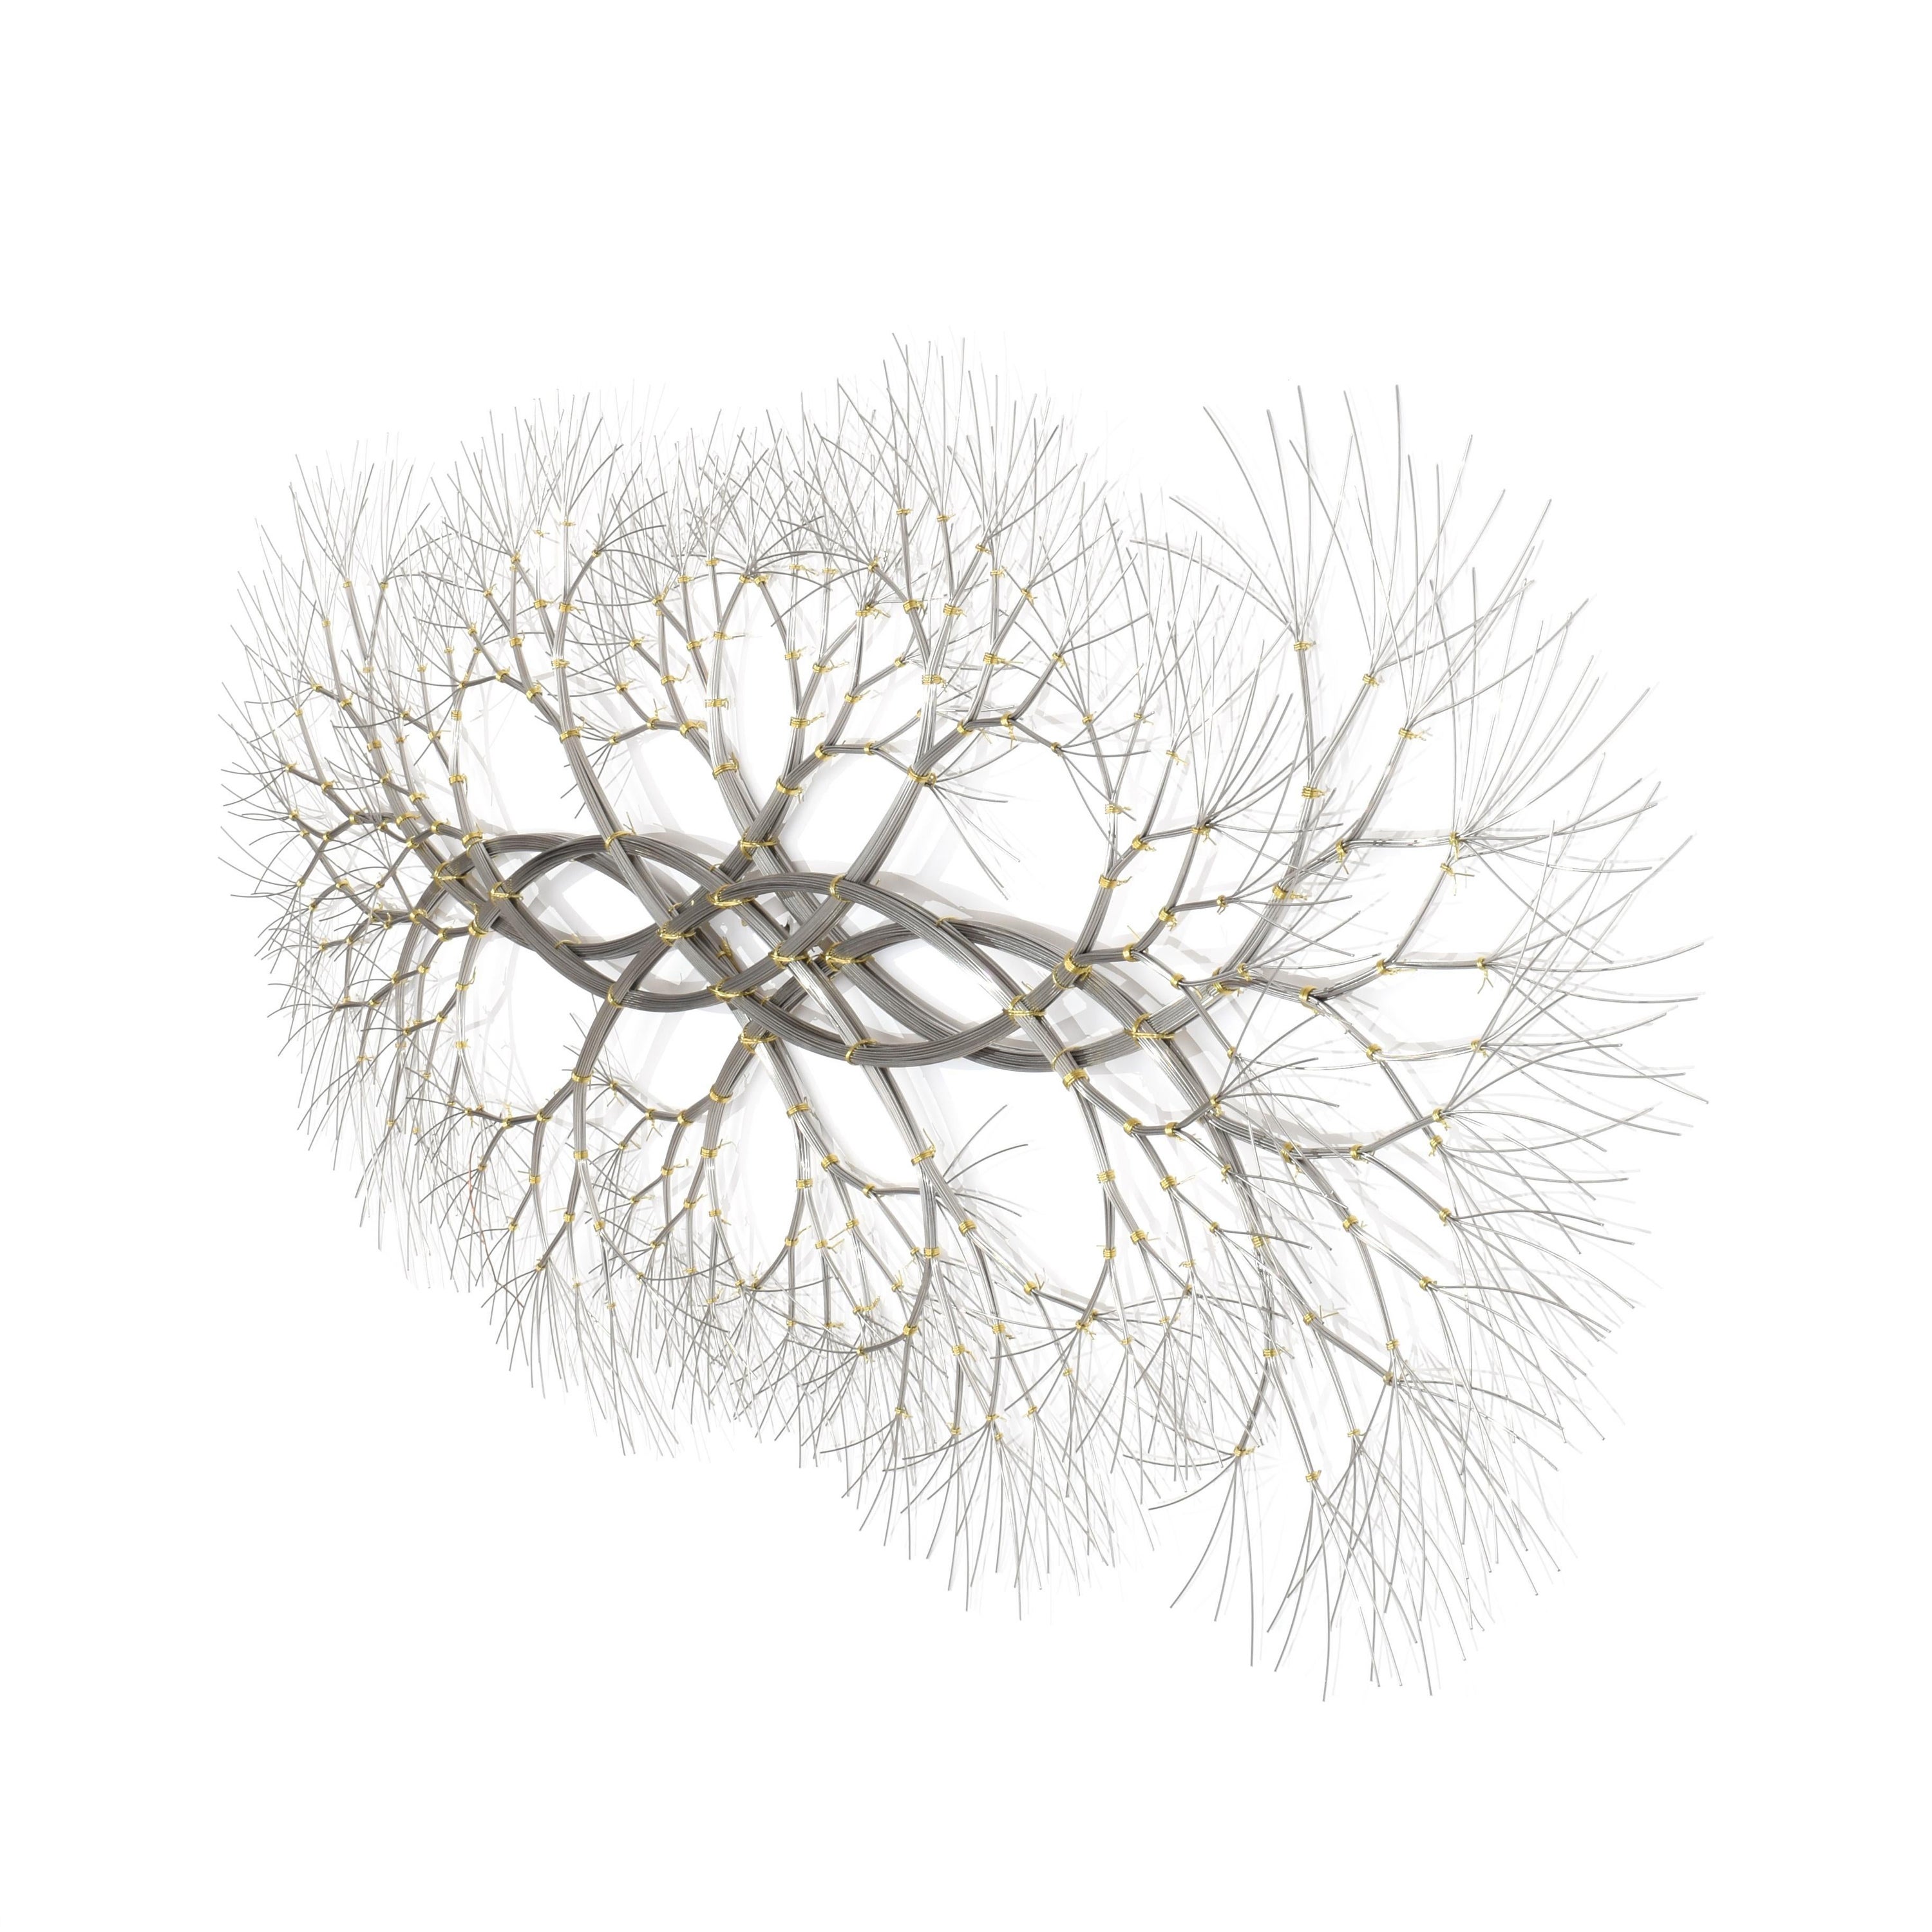 This metal wall mount sculpture is created using stainless steel wire. Kue uses an aesthetic reminiscent of trees, electricity, and light to create sculptures of peace and beauty. Adults and children alike see snowflakes, trees, flowers, ocean